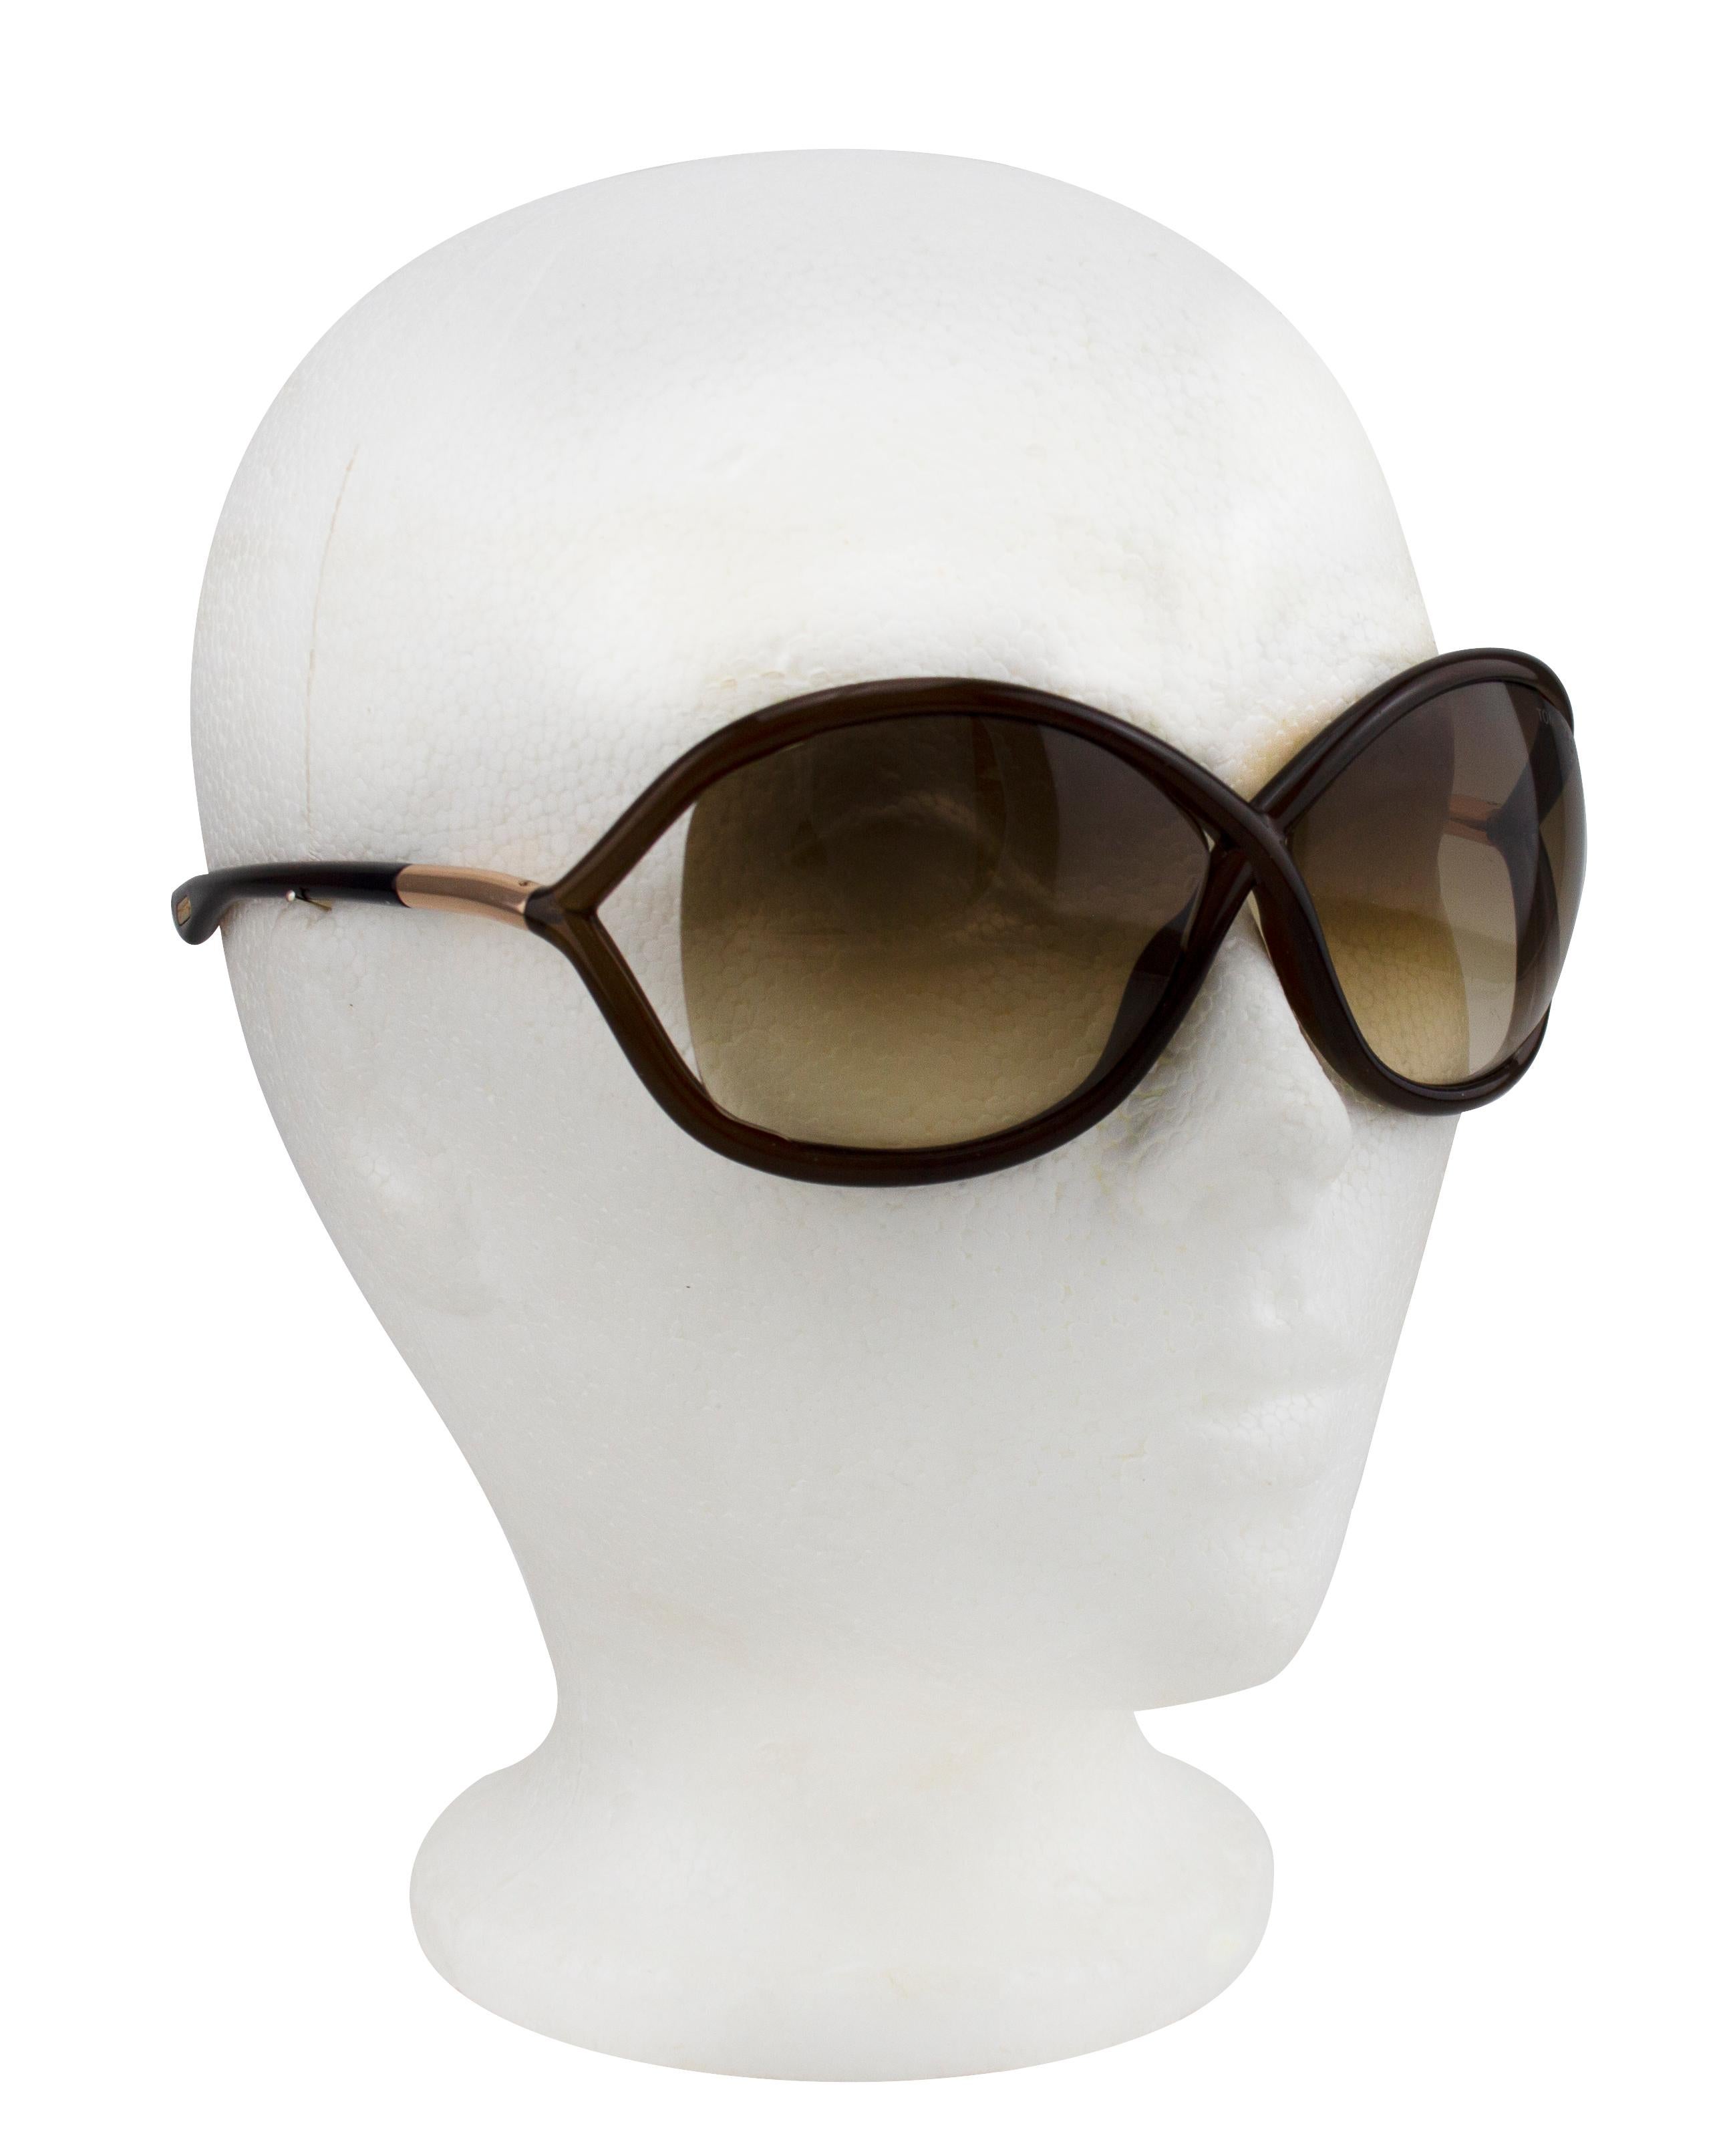 The iconic Tom Ford dark brown Whitney sunglasses. Round acetate frame with brown gradient lenses. Logo etched at top left corner of left side when wearing. Integrated nose pads. Silver metal detail at temples and logo engraved at temple tips. Sold